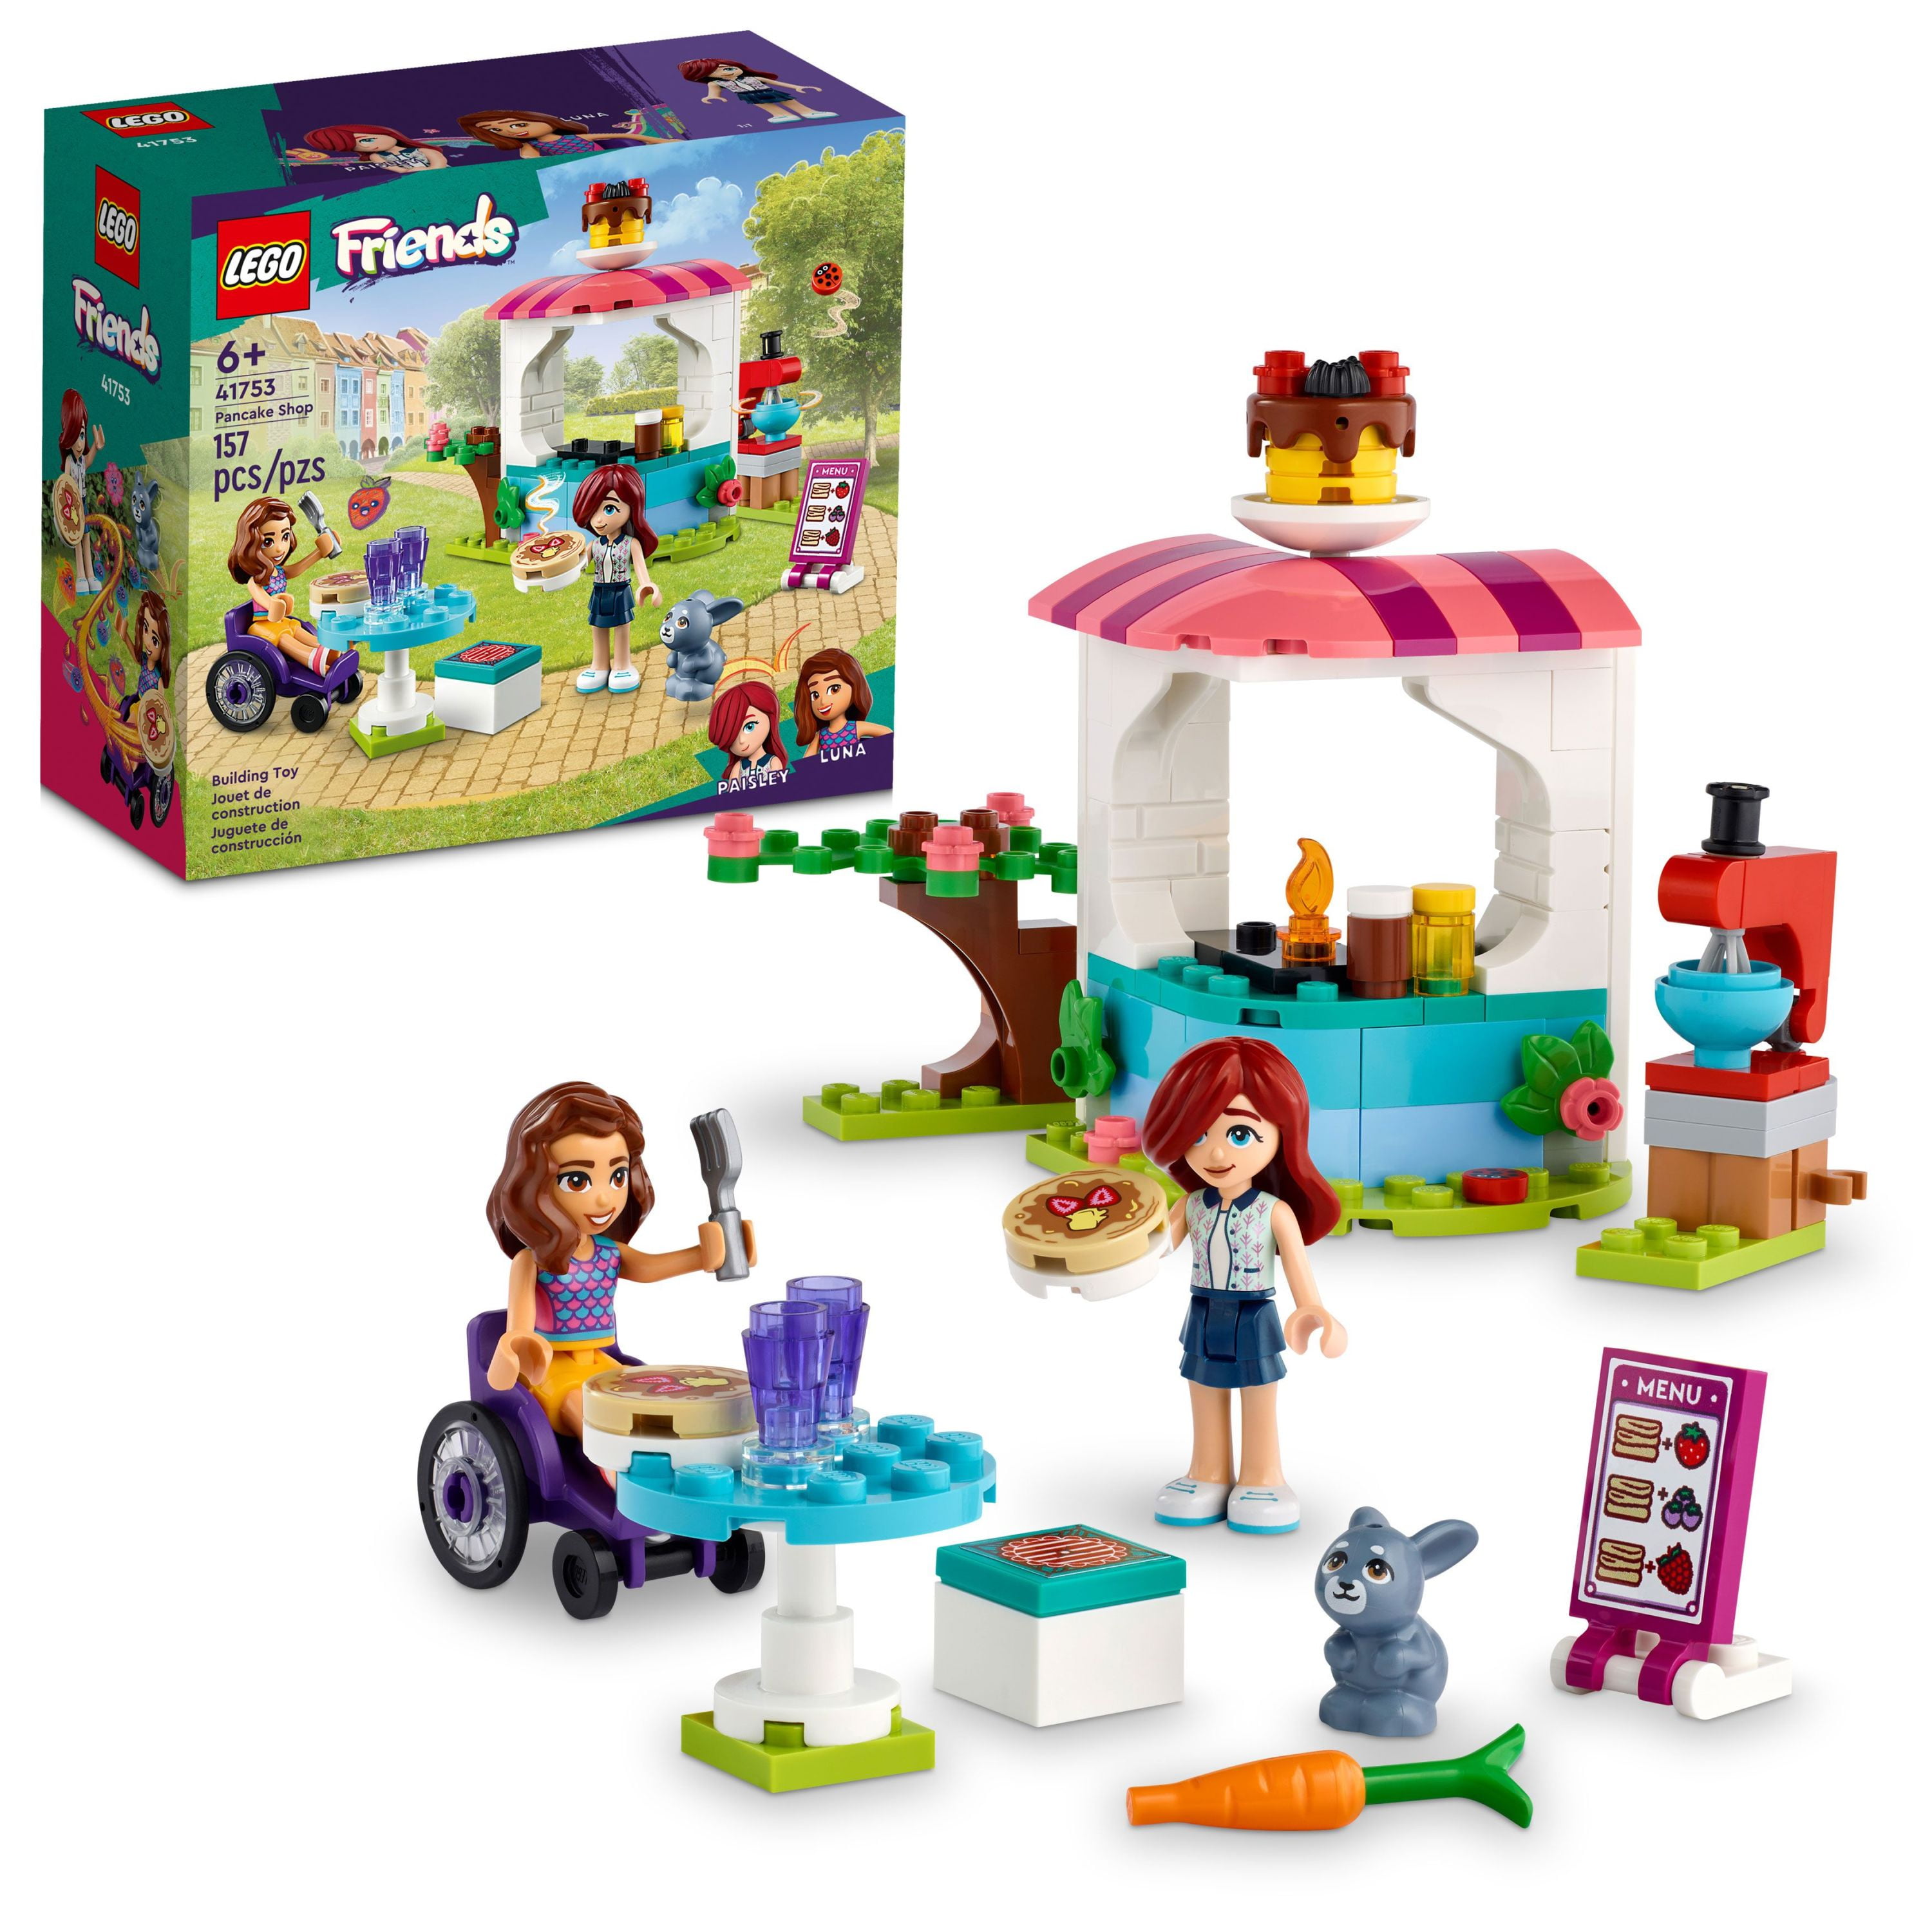 for 4 Up, LEGO & Ice-Cream Play Girls Roxy and Toy Andrea Van, Building 41715 and Ages Toy Friends Mini-Dolls, Pretend Truck Kids Dog Toy Accessories, Boys Gift Featuring